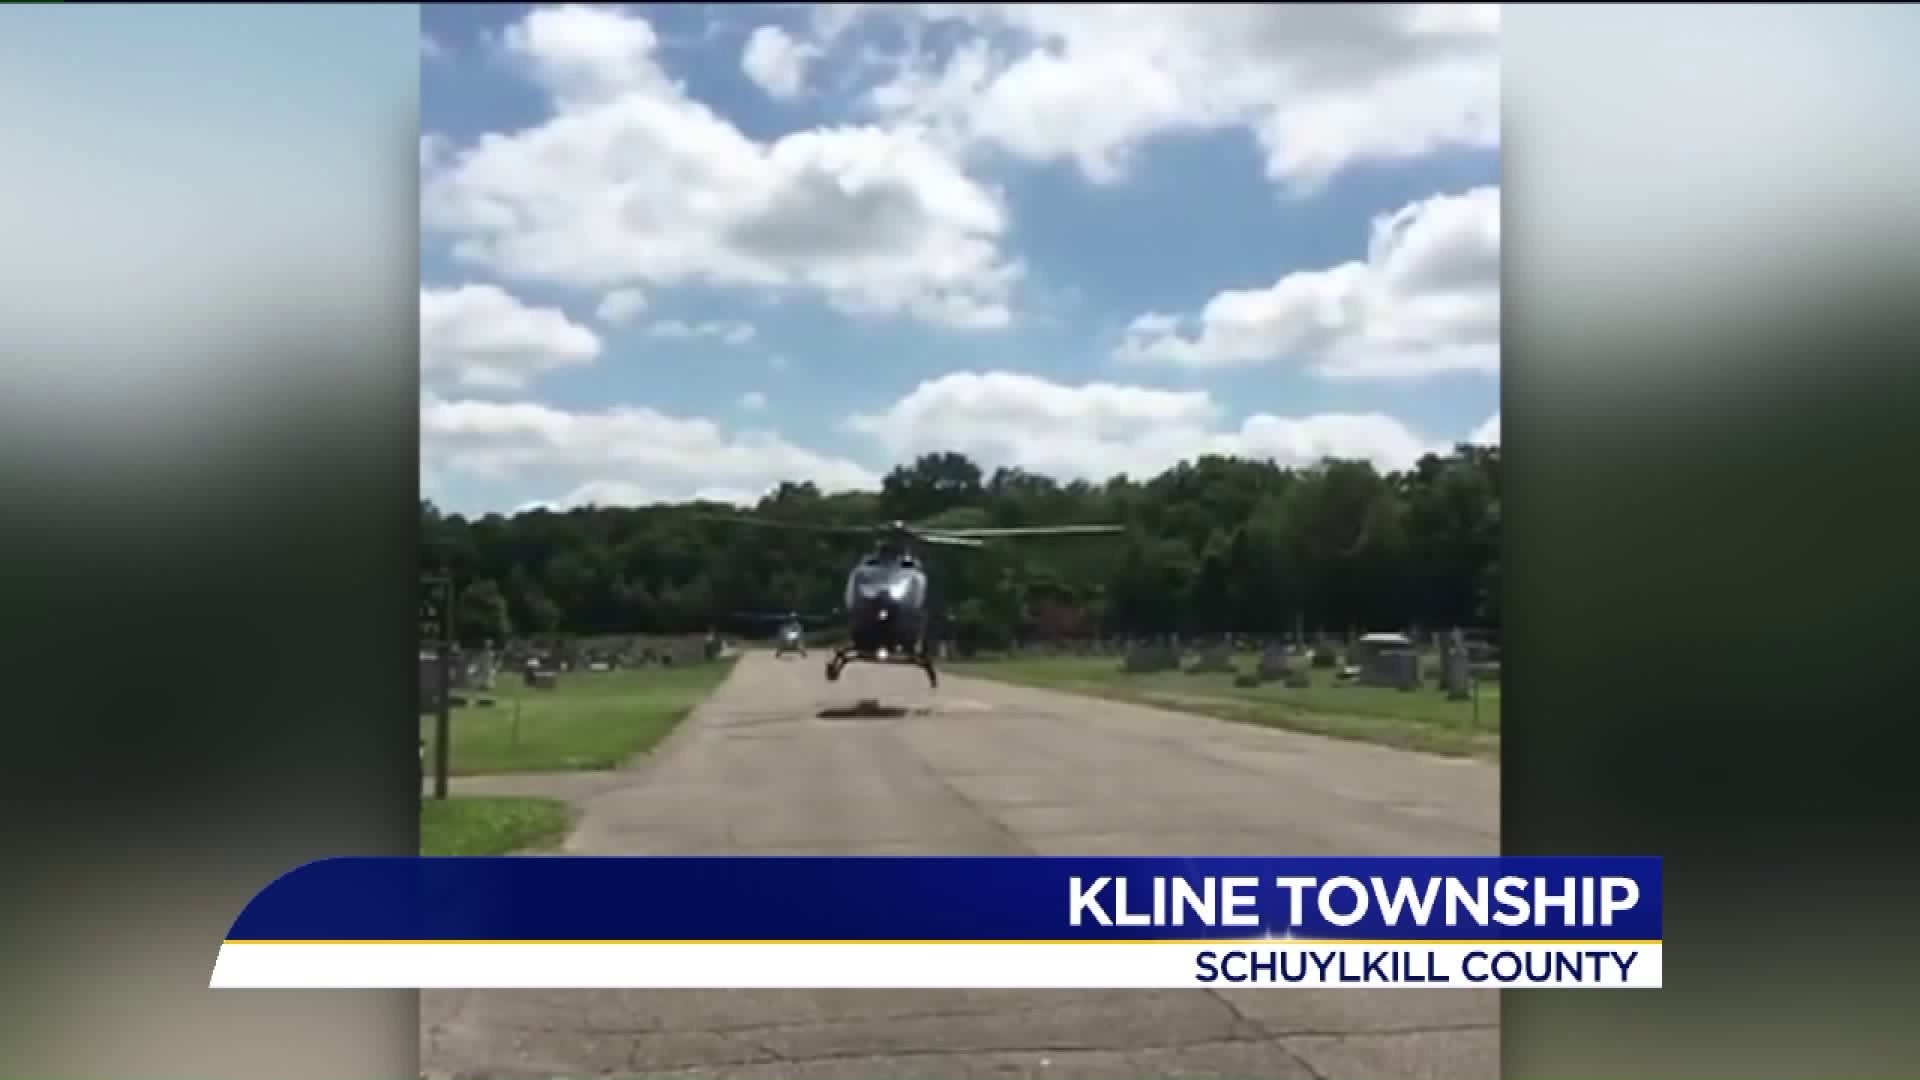 Two People Flown to Hospital After Motorcycle Crash in Schuylkill County